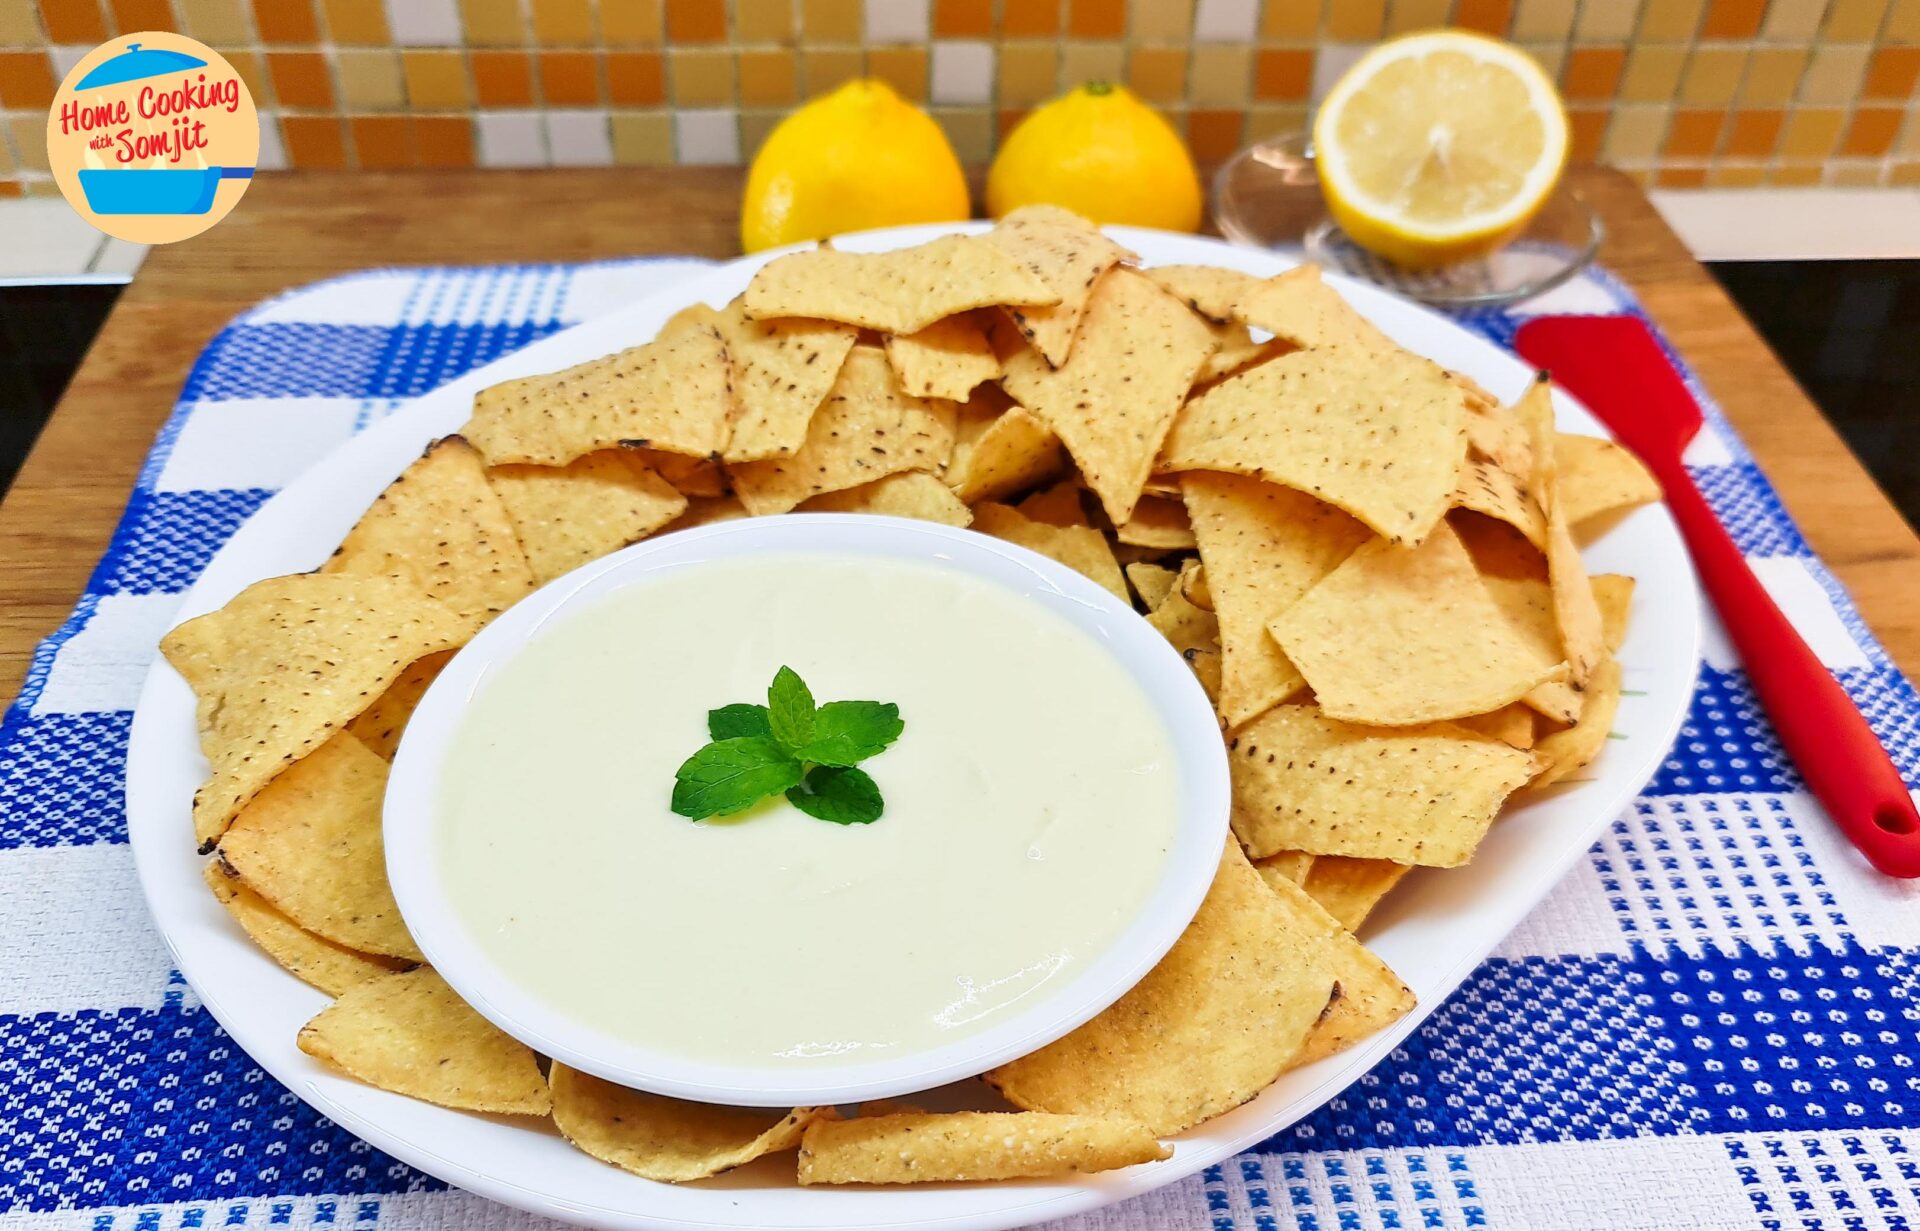 Sour Cream and Onion Dip